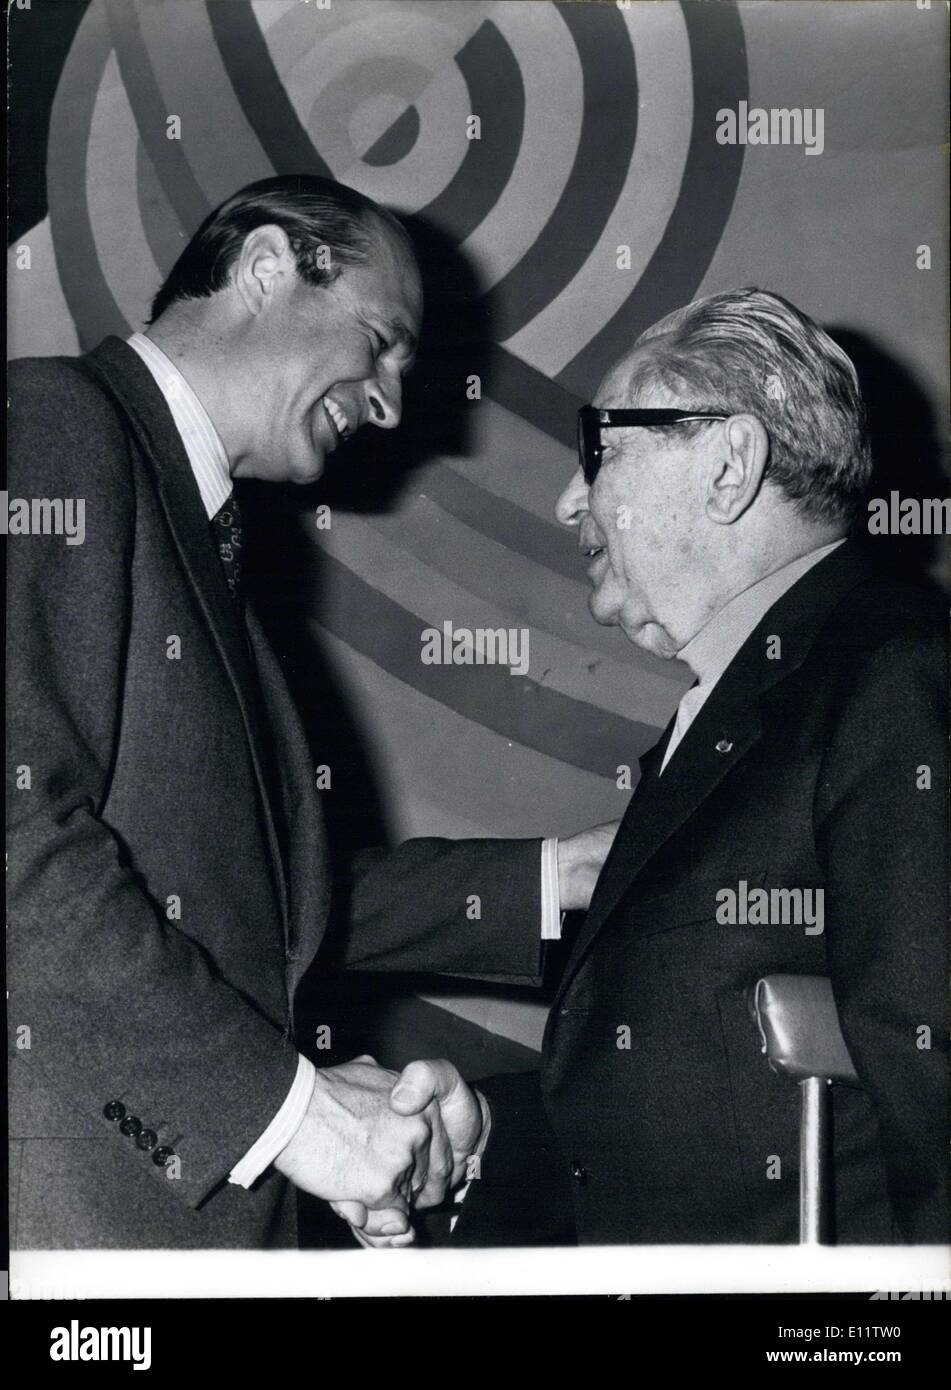 Apr. 04, 1980 - Jacques Chirac gave the famous painter Hans Hartung the Vermeil Medal at the opening of his exposition at the Modern Art Museum in Paris. Stock Photo